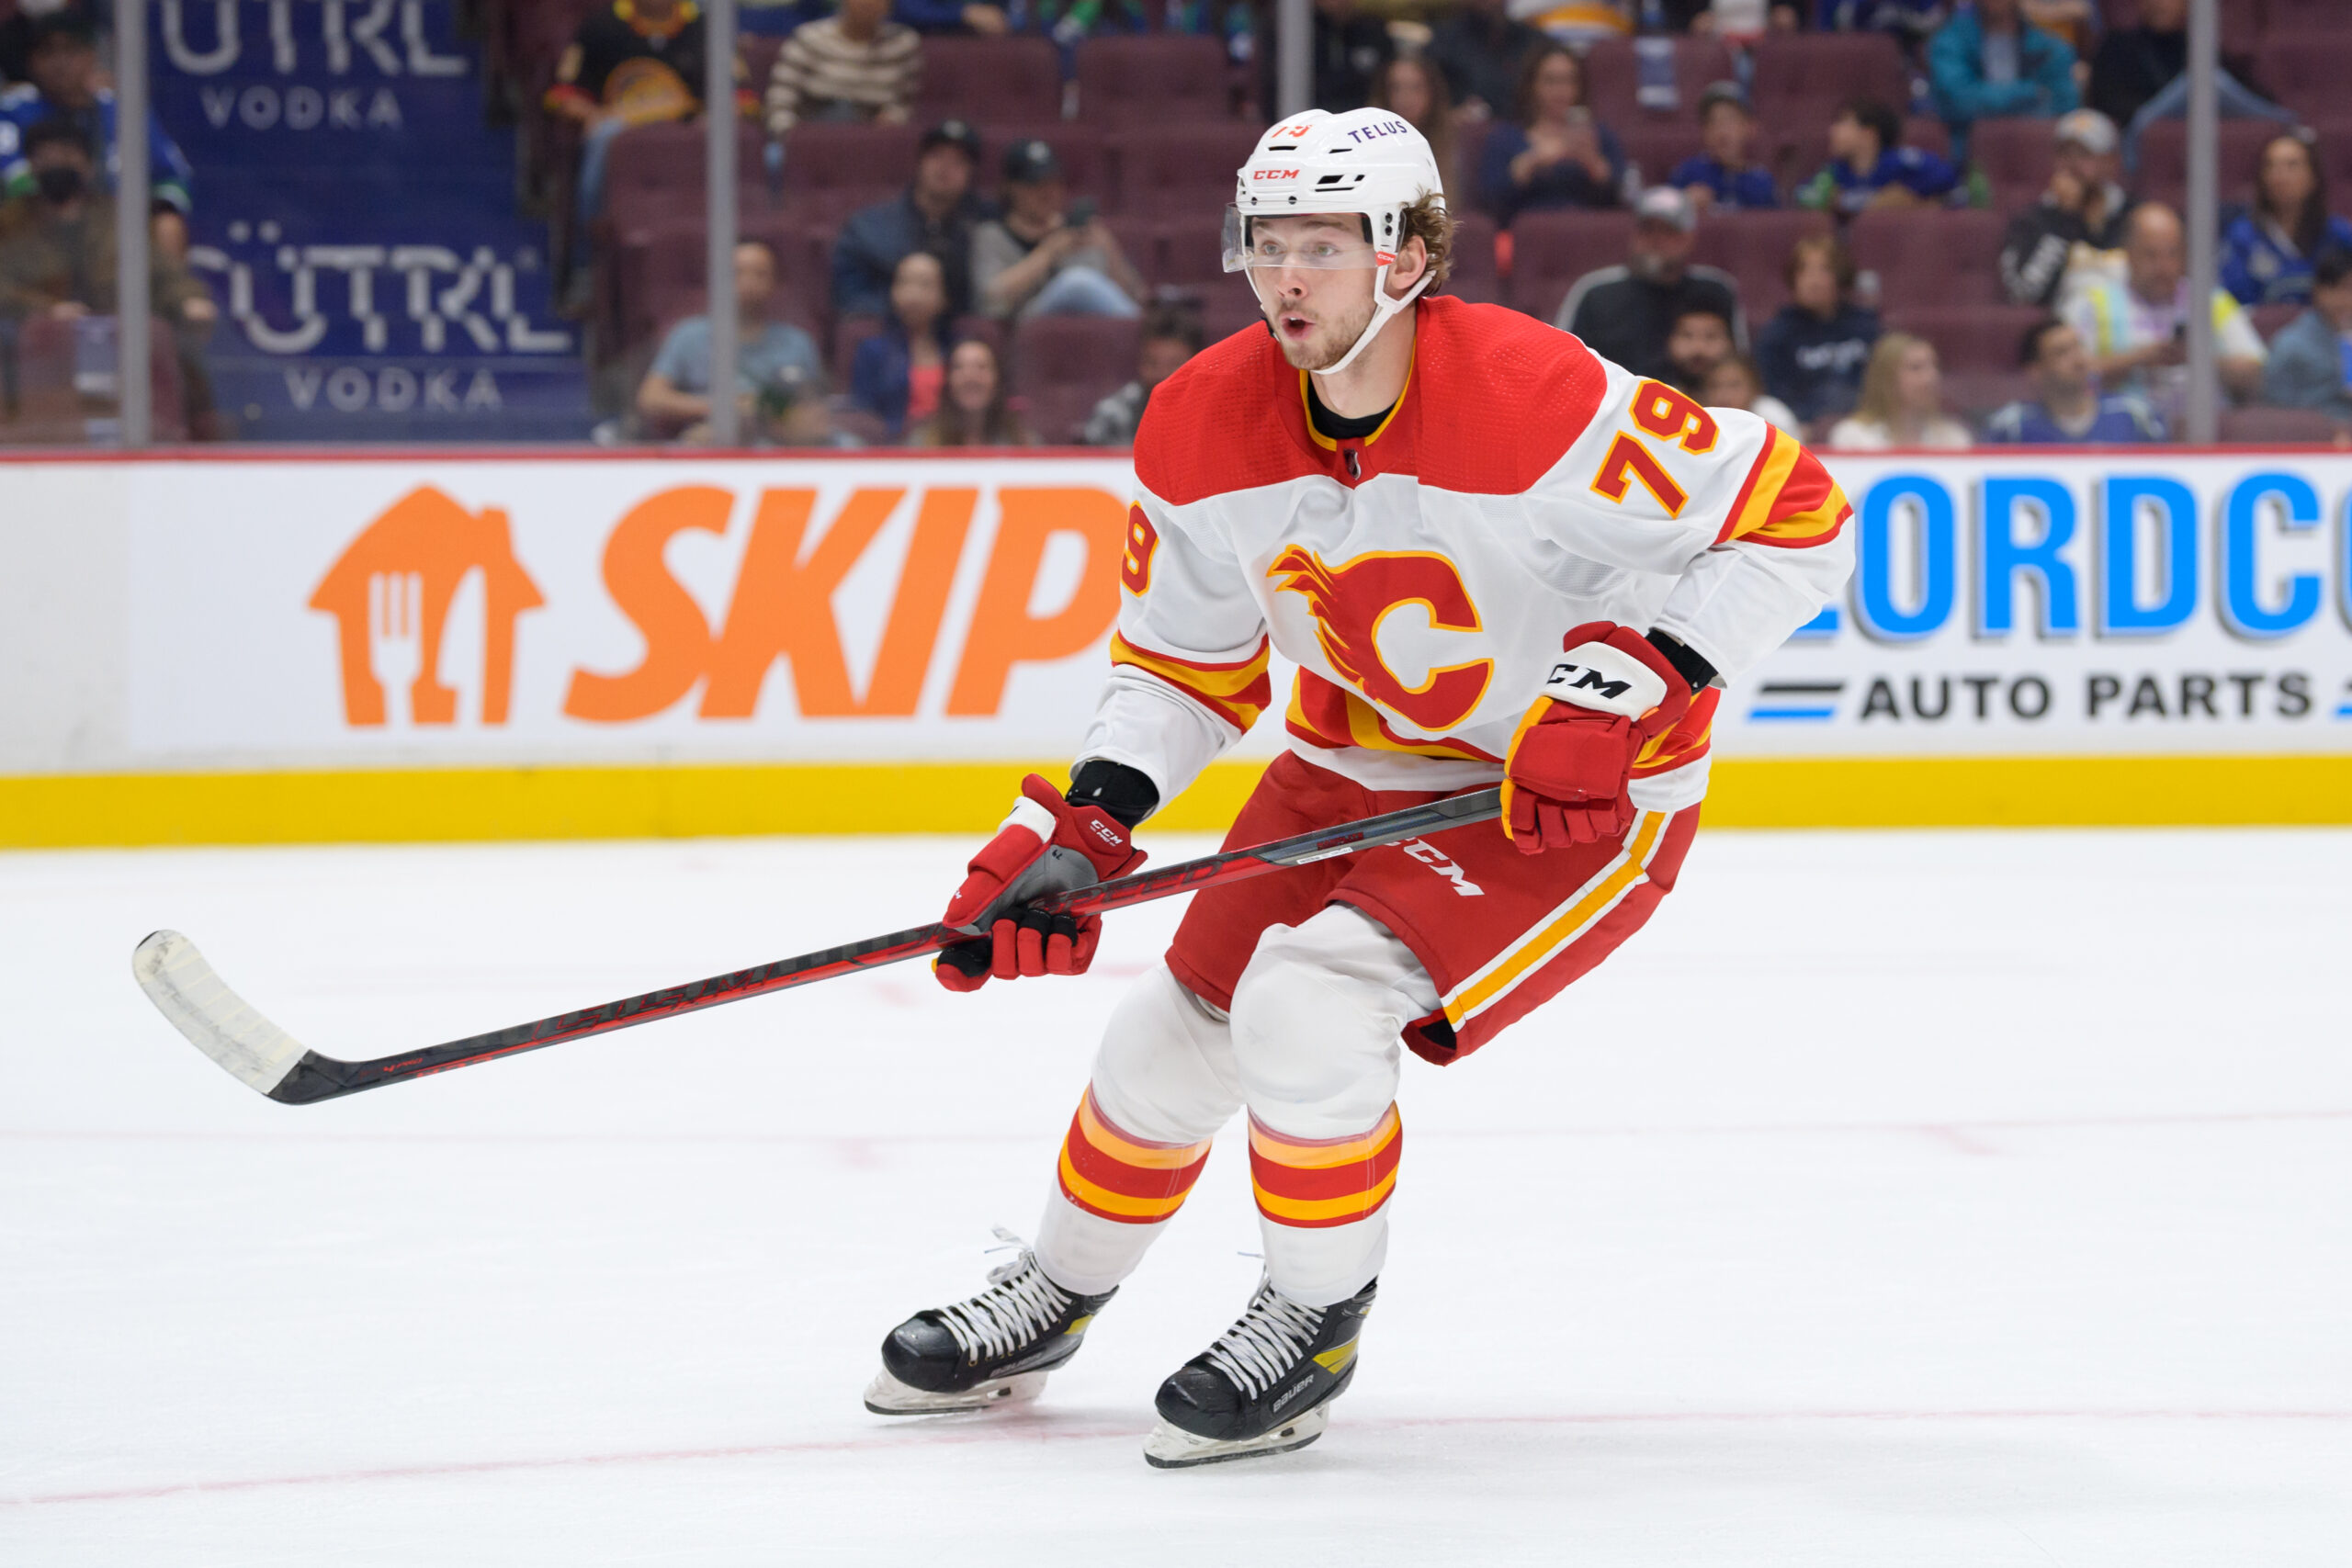 Do the Calgary Flames have the best jerseys in the league? - FlamesNation